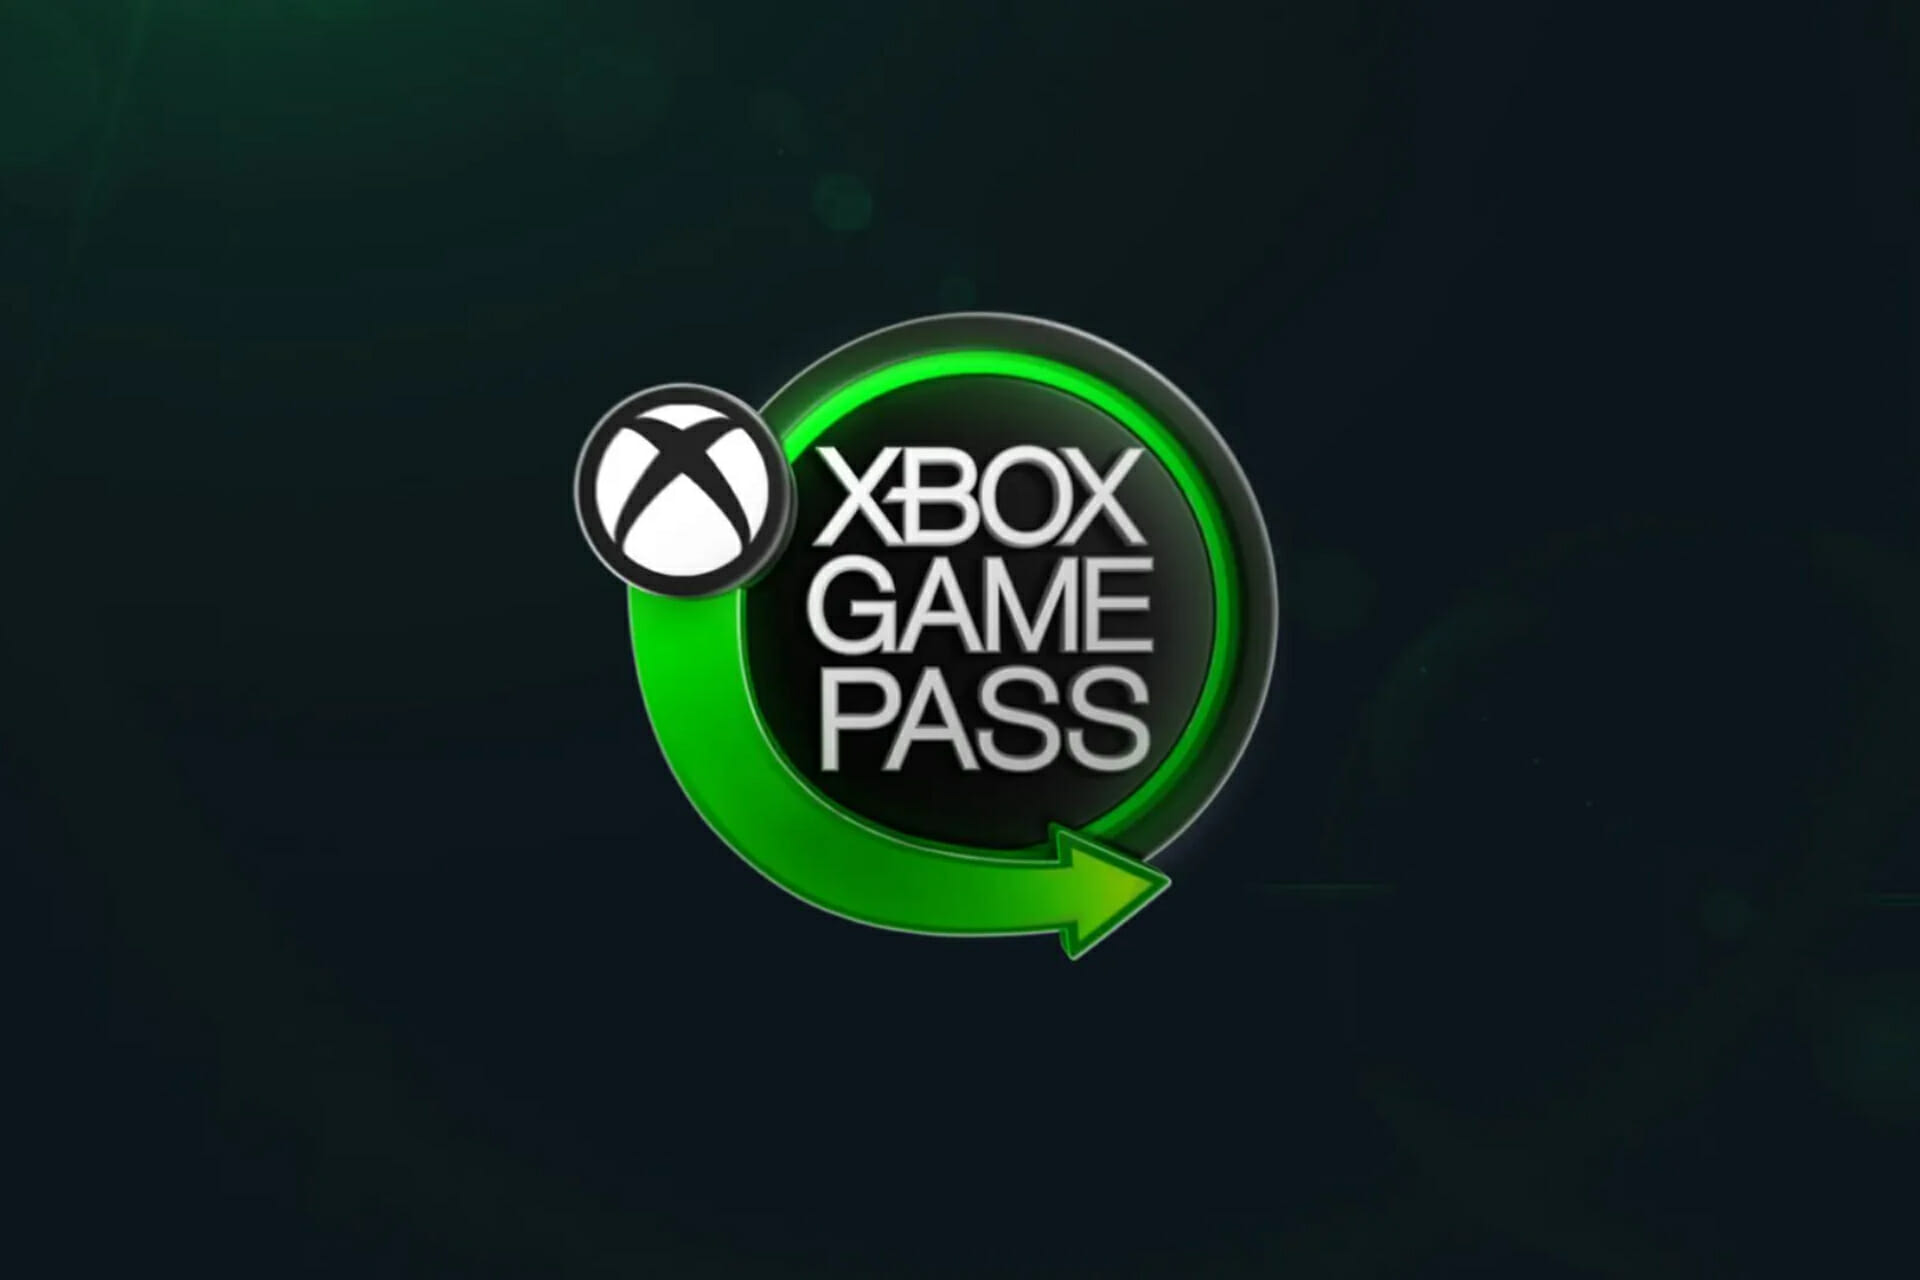 Get Ready for Family Game Night with Xbox Game Pass and Ben 10,  Transformers, the PAW Patrol, and Ryan's World - Xbox Wire